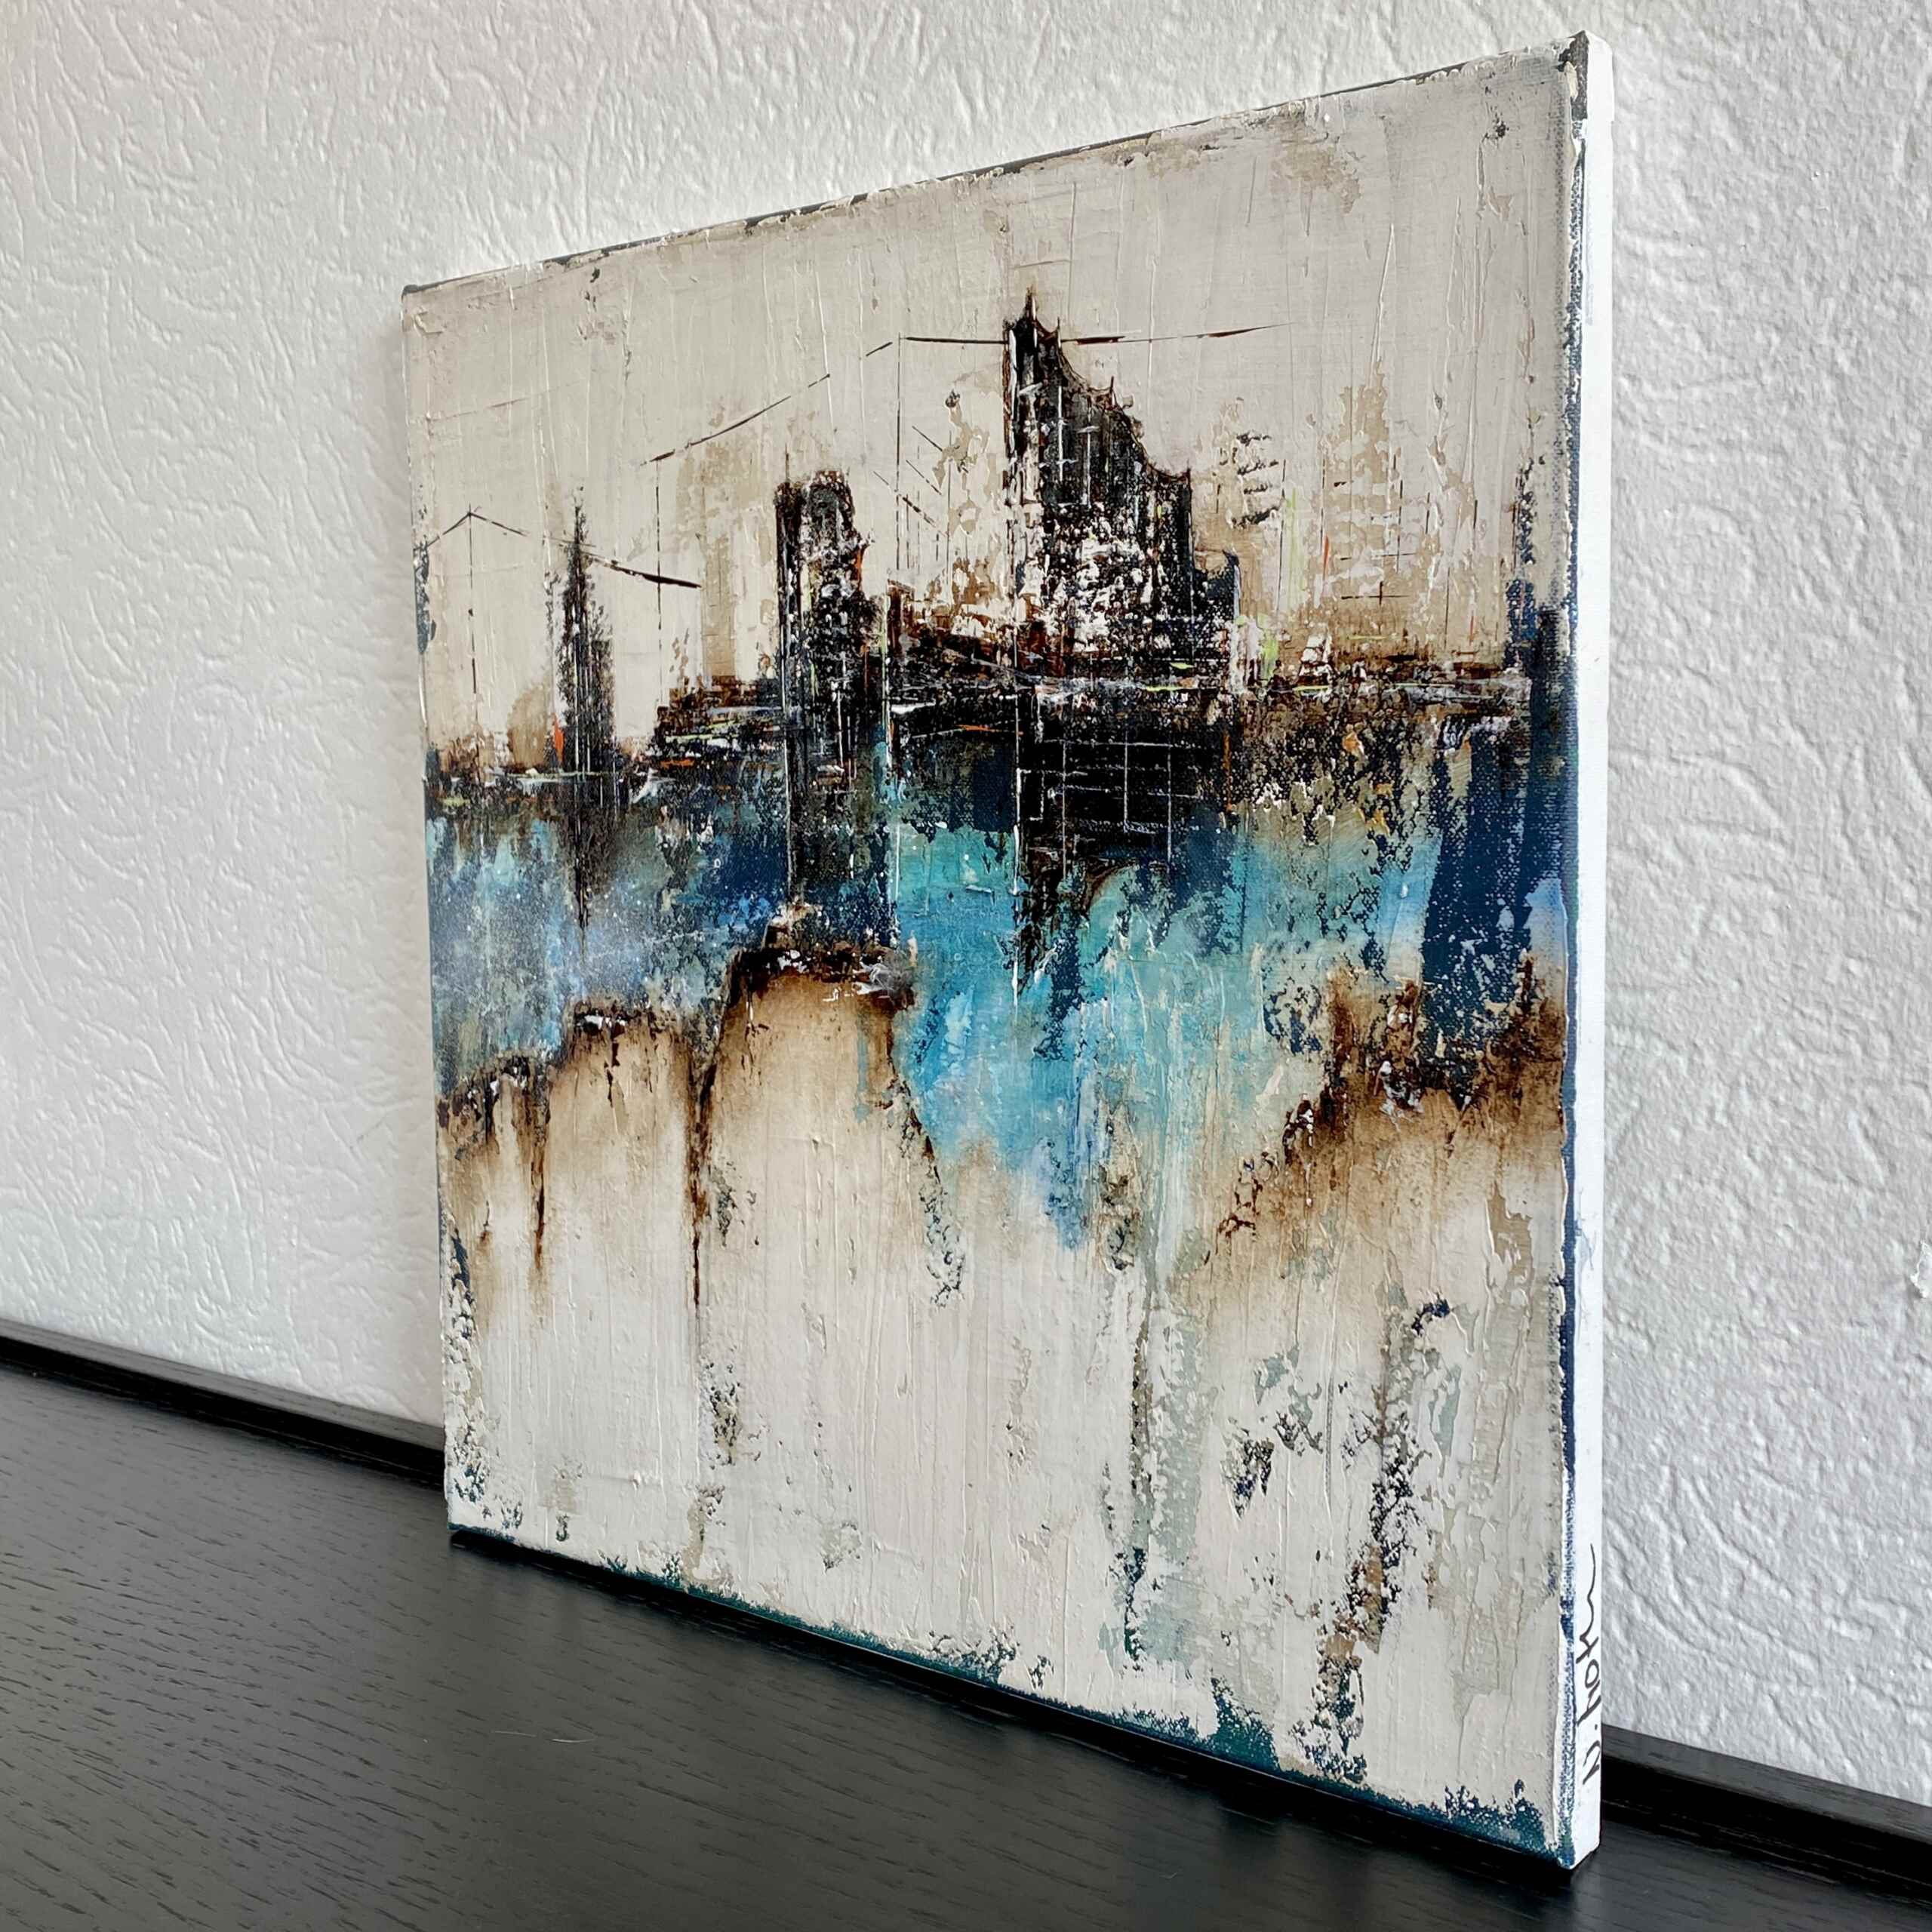 Side view of artwork "Elbe Impressions No 1" by Nina Groth